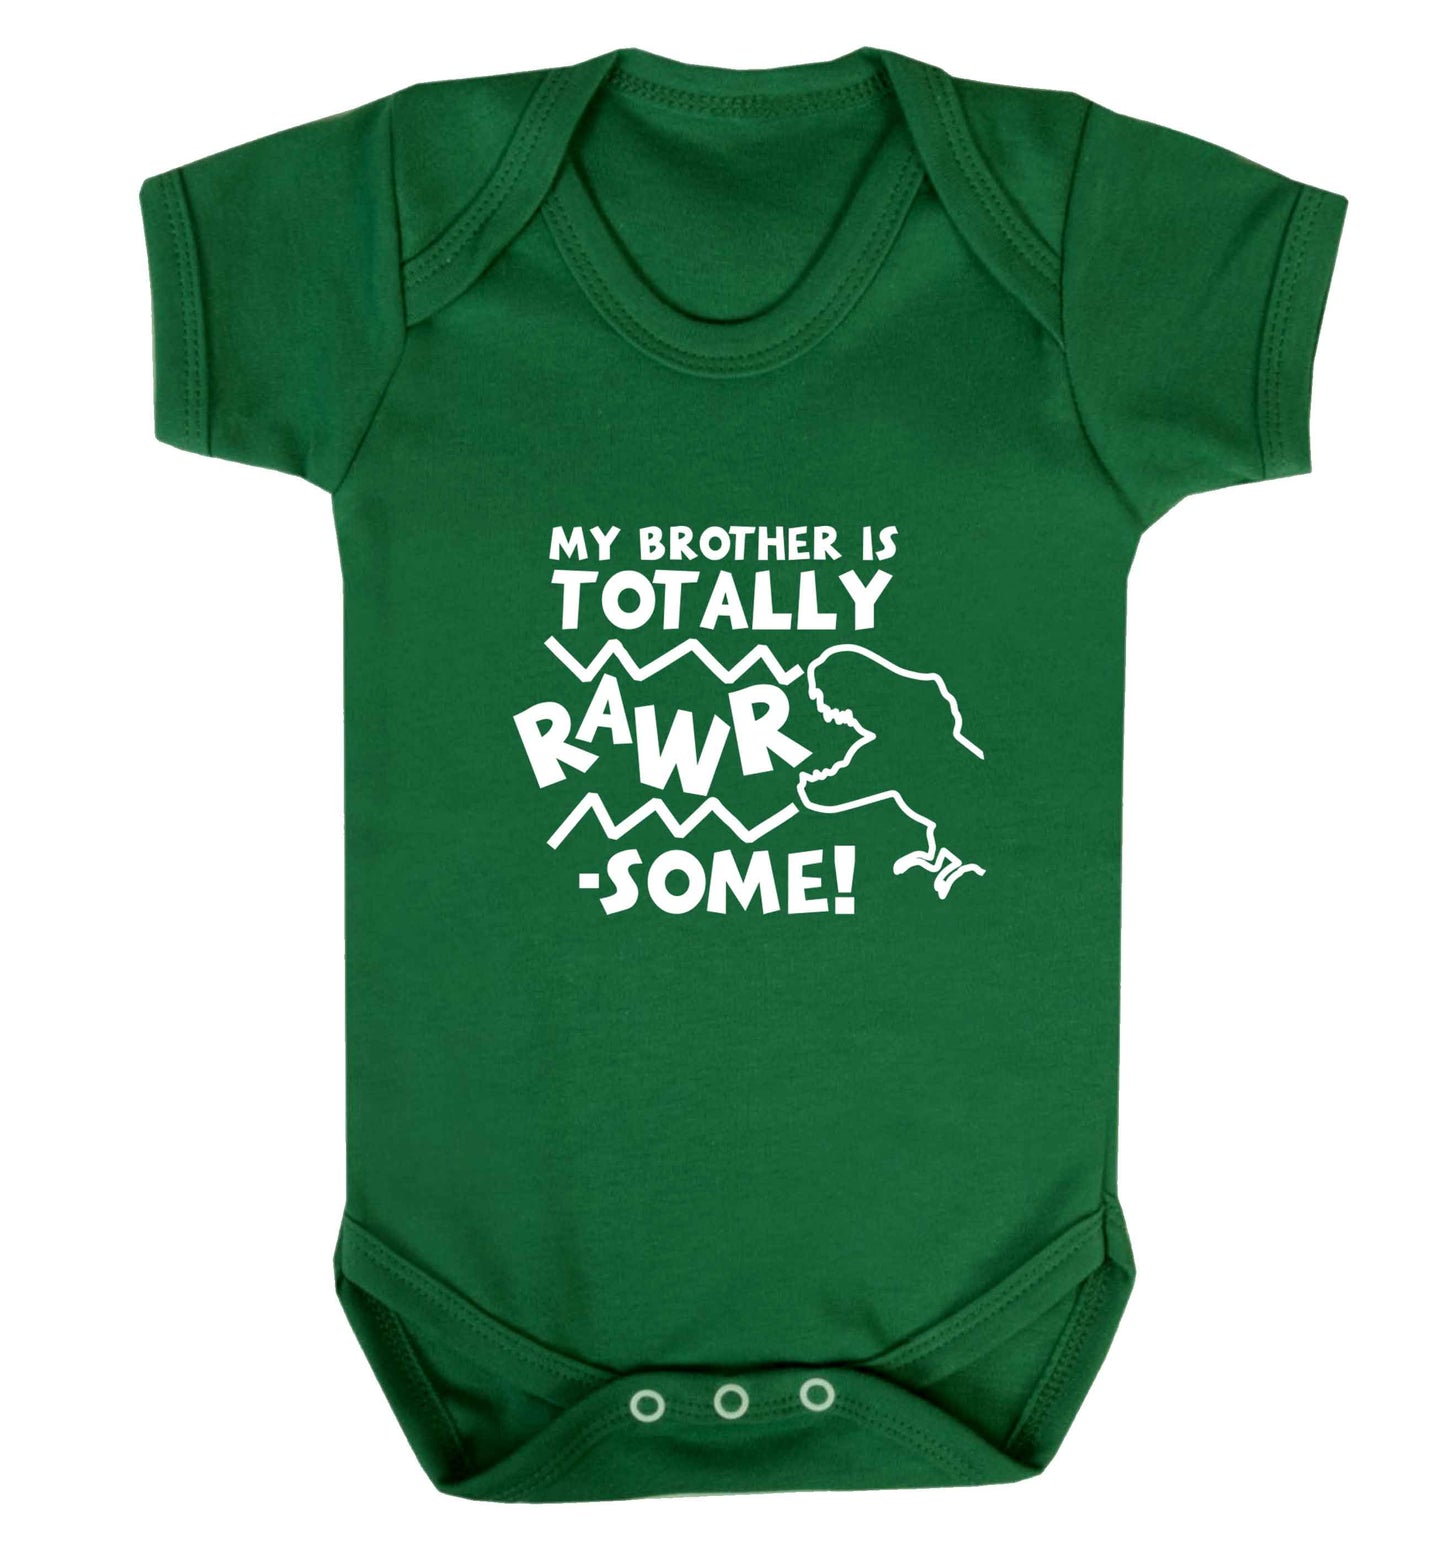 My brother is totally rawrsome baby vest green 18-24 months